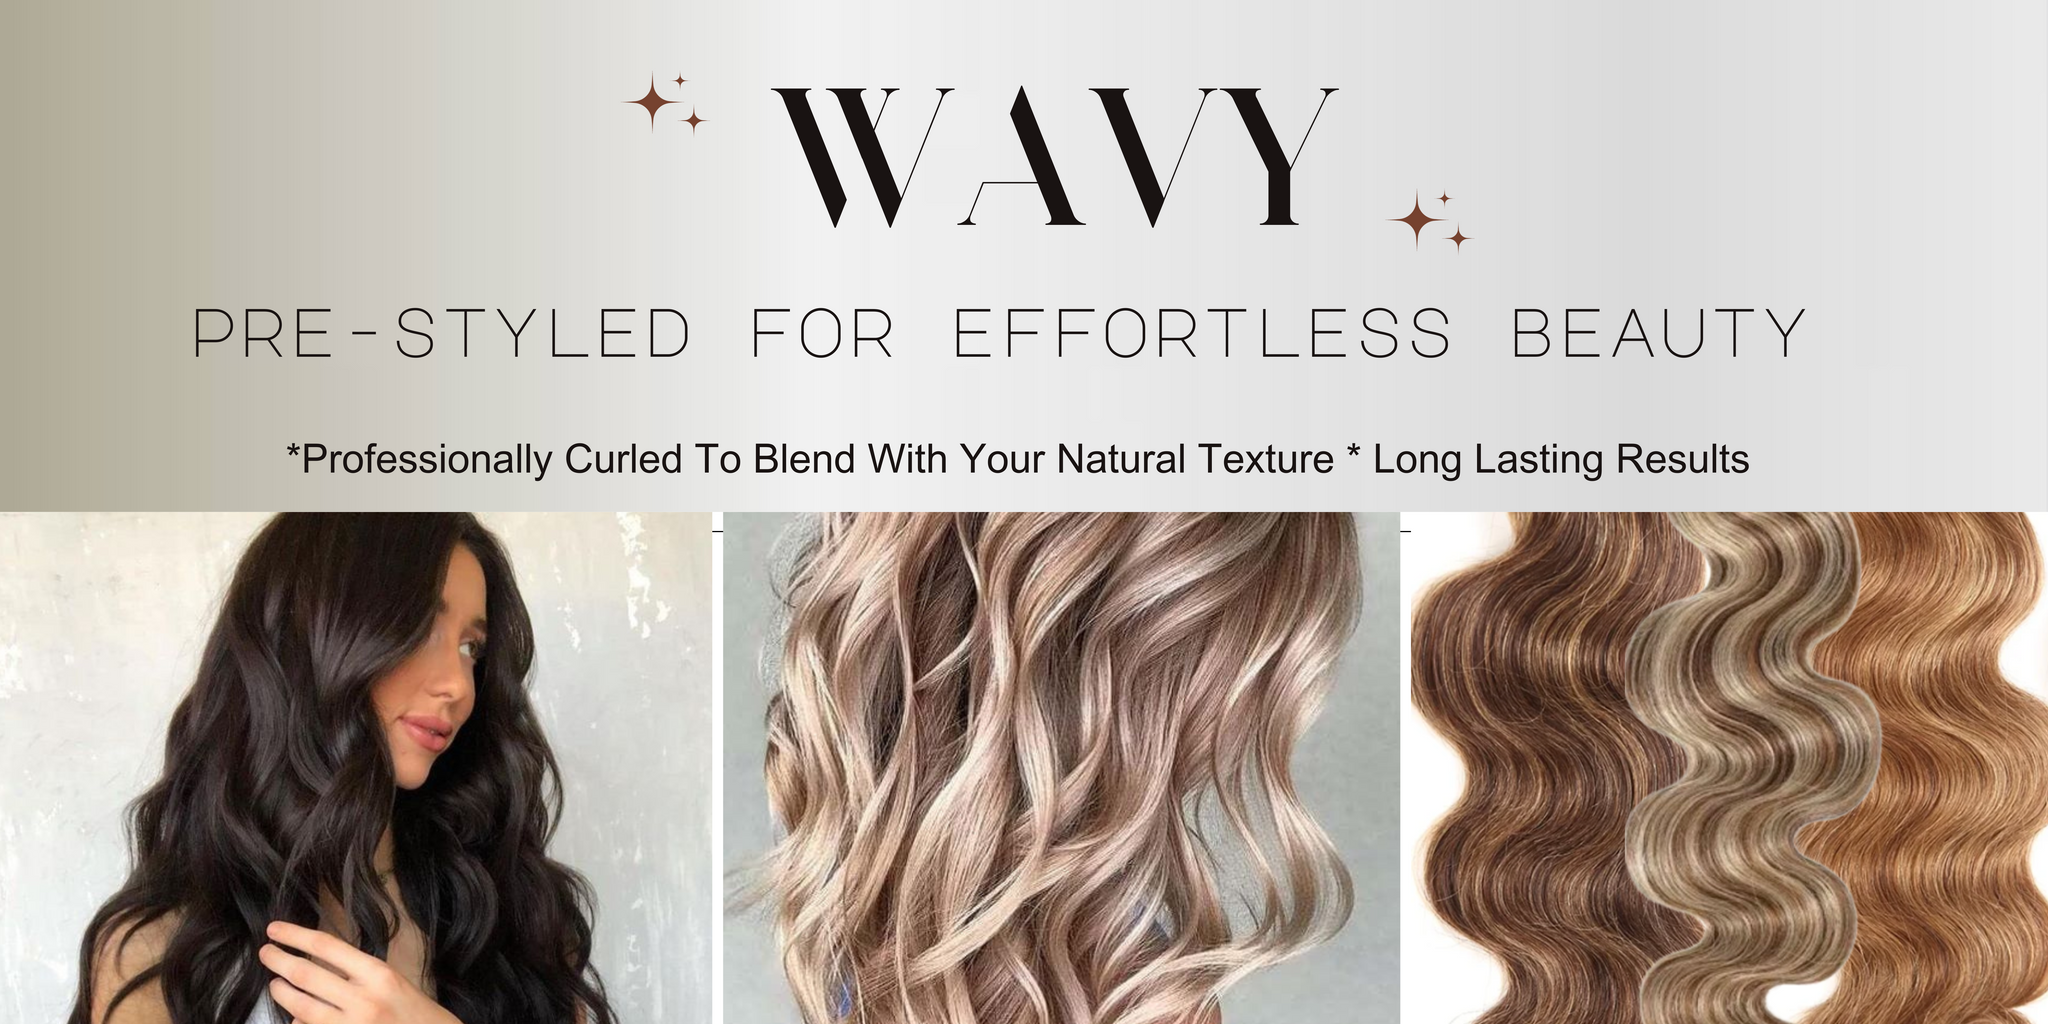 WAVY CLIP-IN HAIR EXTENSIONS – Pure Remy Hair Extensions